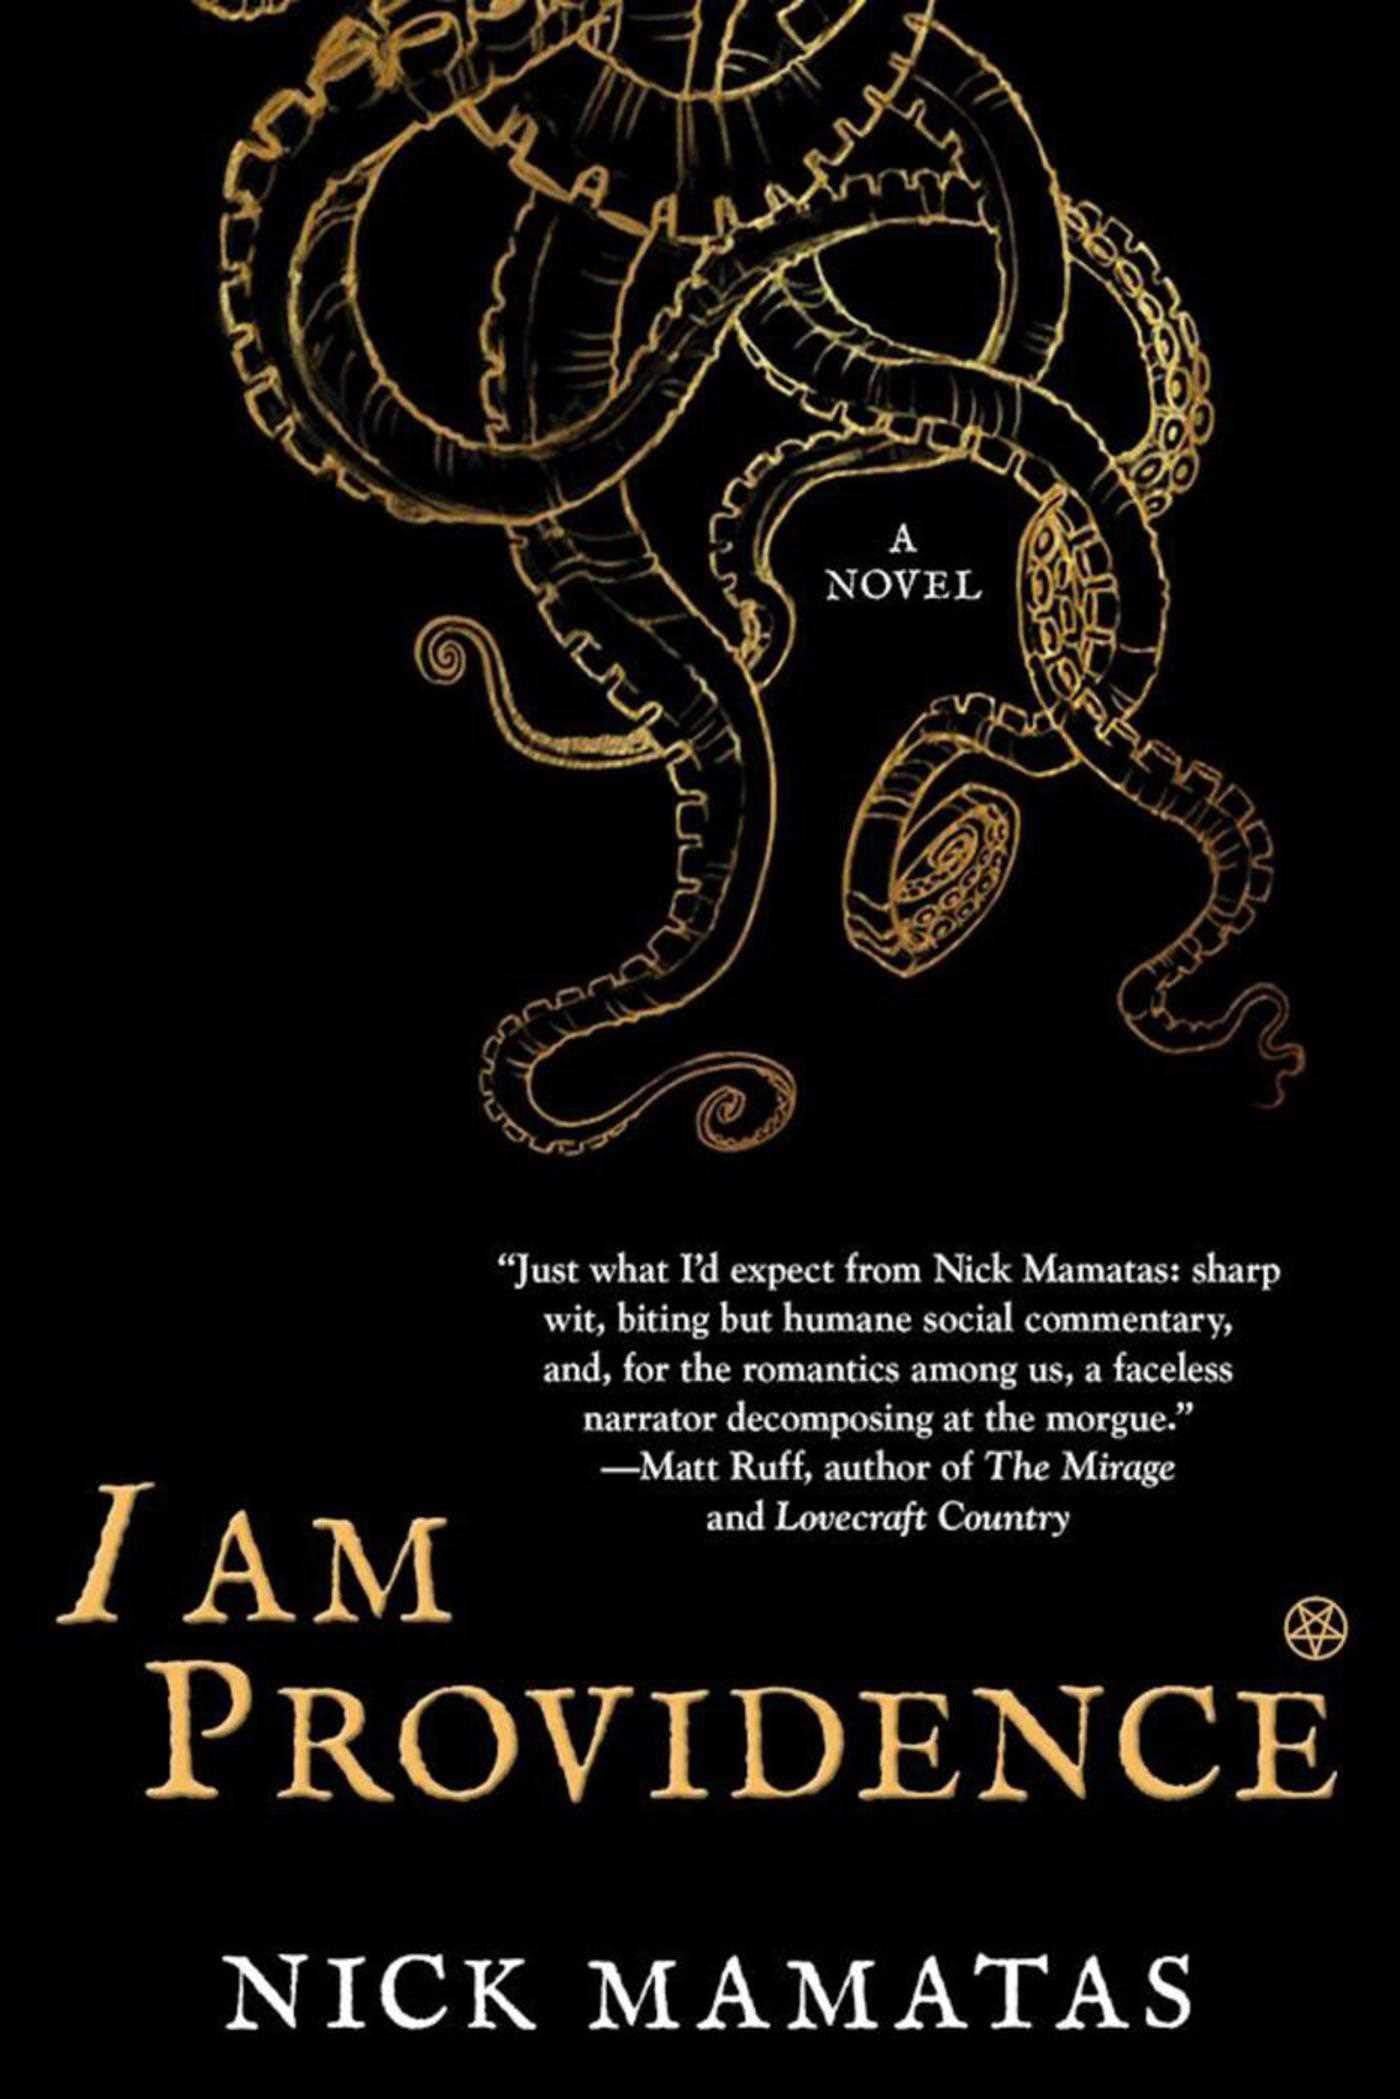 Donnie's Review of I AM PROVIDENCE by Nick Mamatas